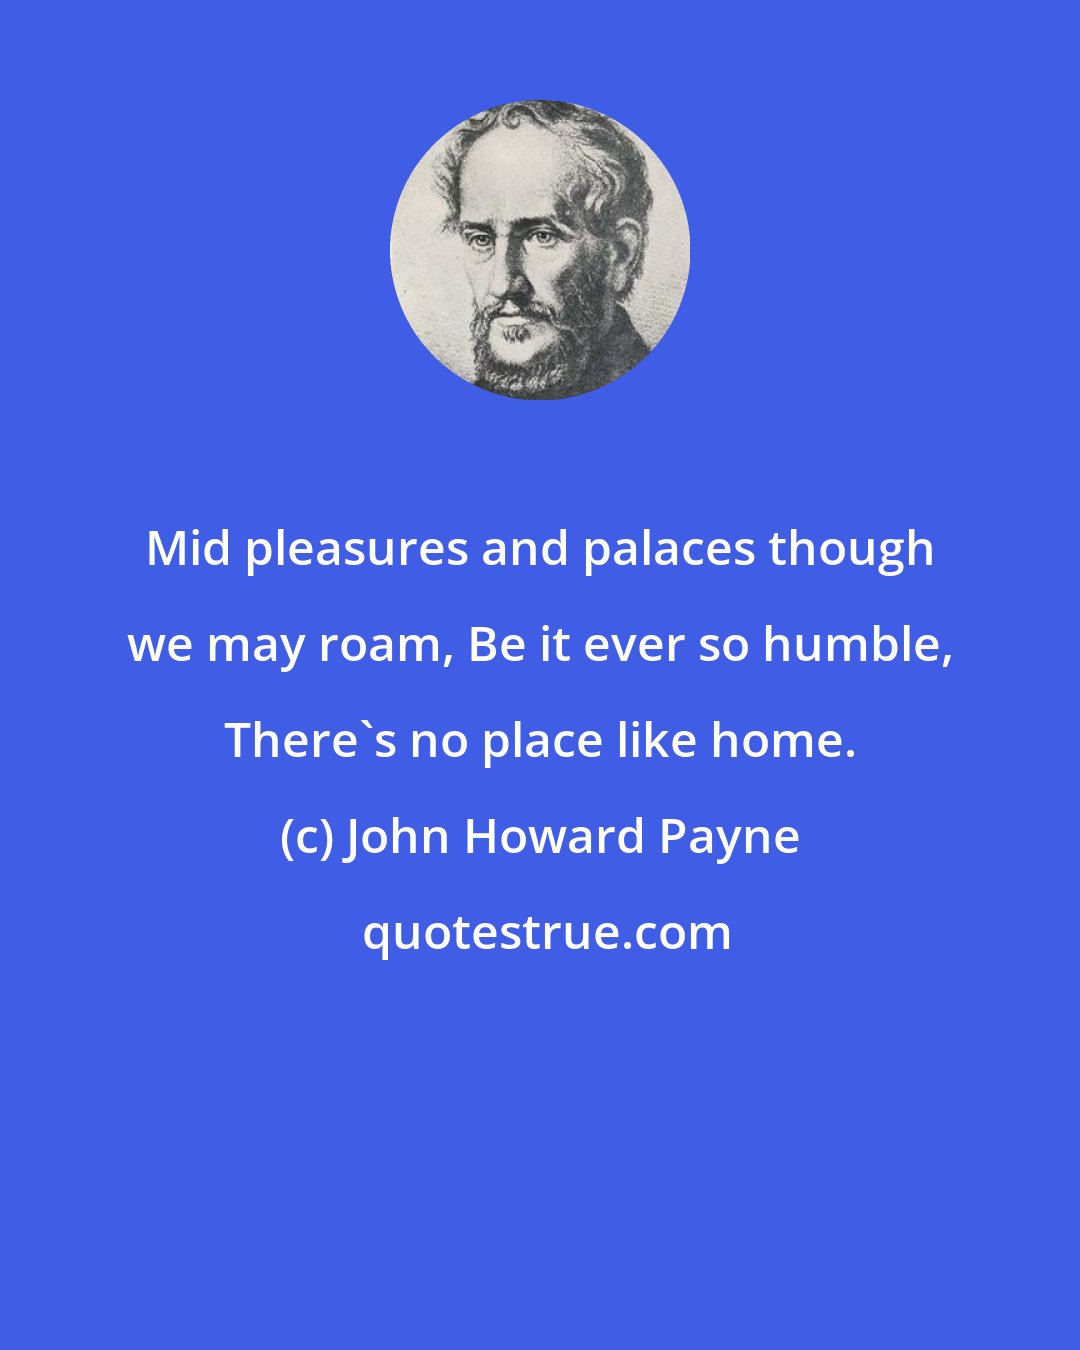 John Howard Payne: Mid pleasures and palaces though we may roam, Be it ever so humble, There's no place like home.